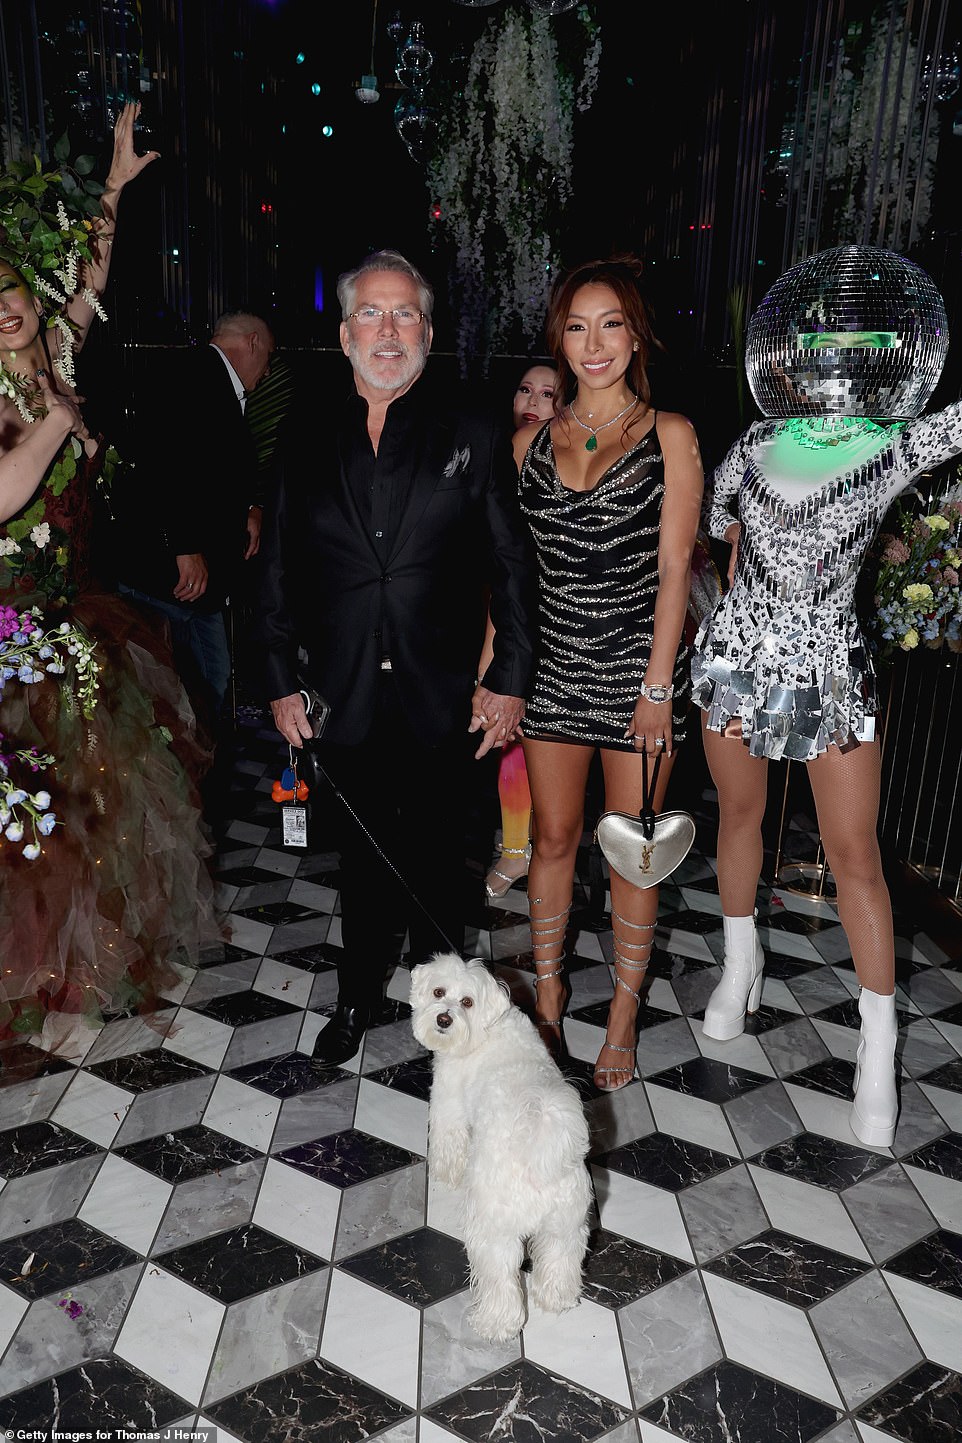 Thomas and Evelin are pictured making their grand entrance with their dog Tito.